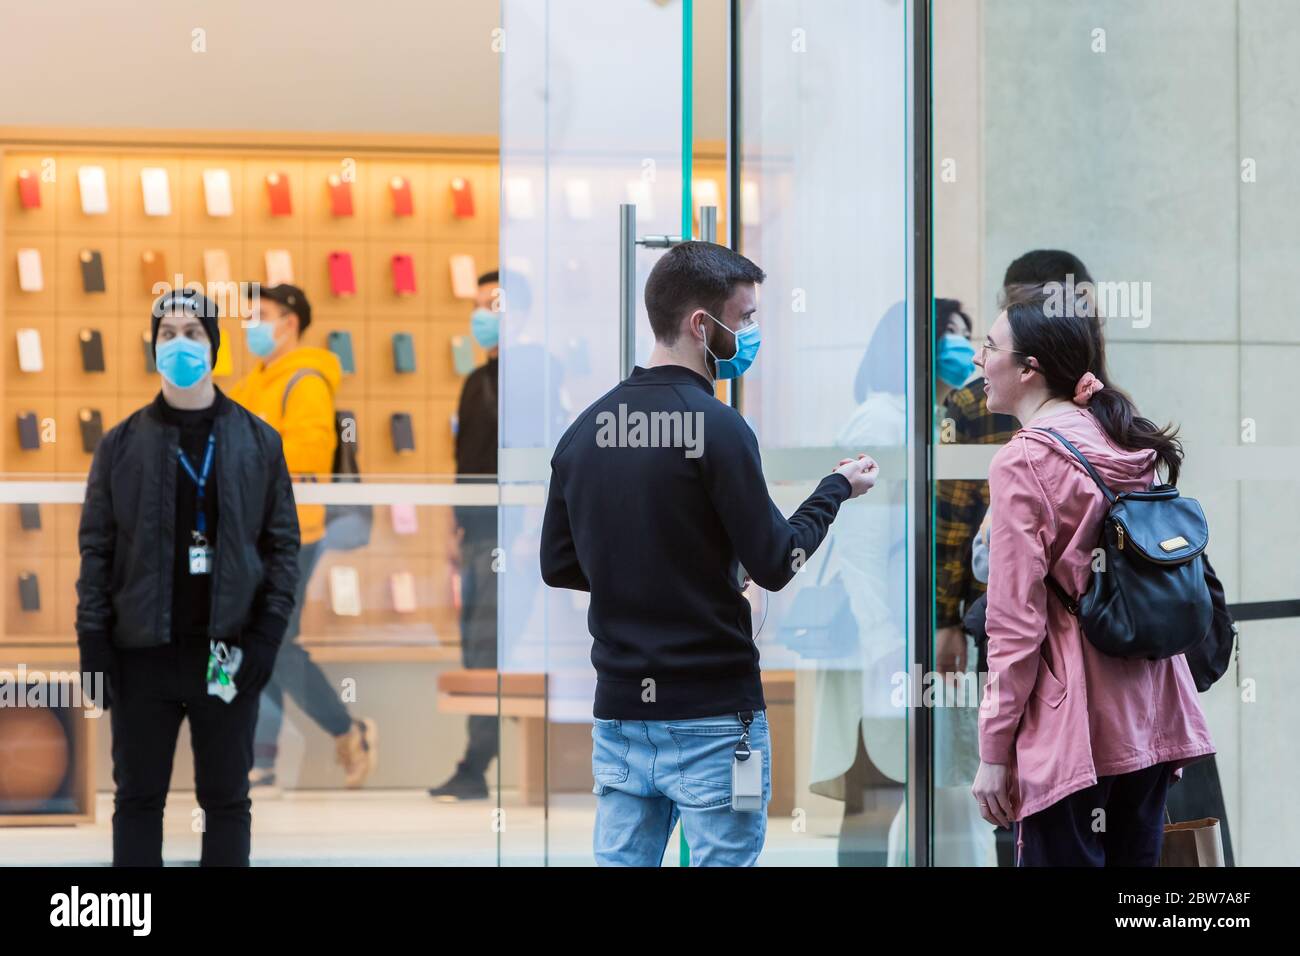 Sydney, Australia. Saturday 30th May 2020. The Apple Store at George Street in Sydney's CBD now opend as well as all the other Apple stores across Australia as the coronavirus lockdown restrictions ease. Apple has added additional safety procedures including temperature checks and social distancing. Credit Paul Lovelace/Alamy Live News Stock Photo